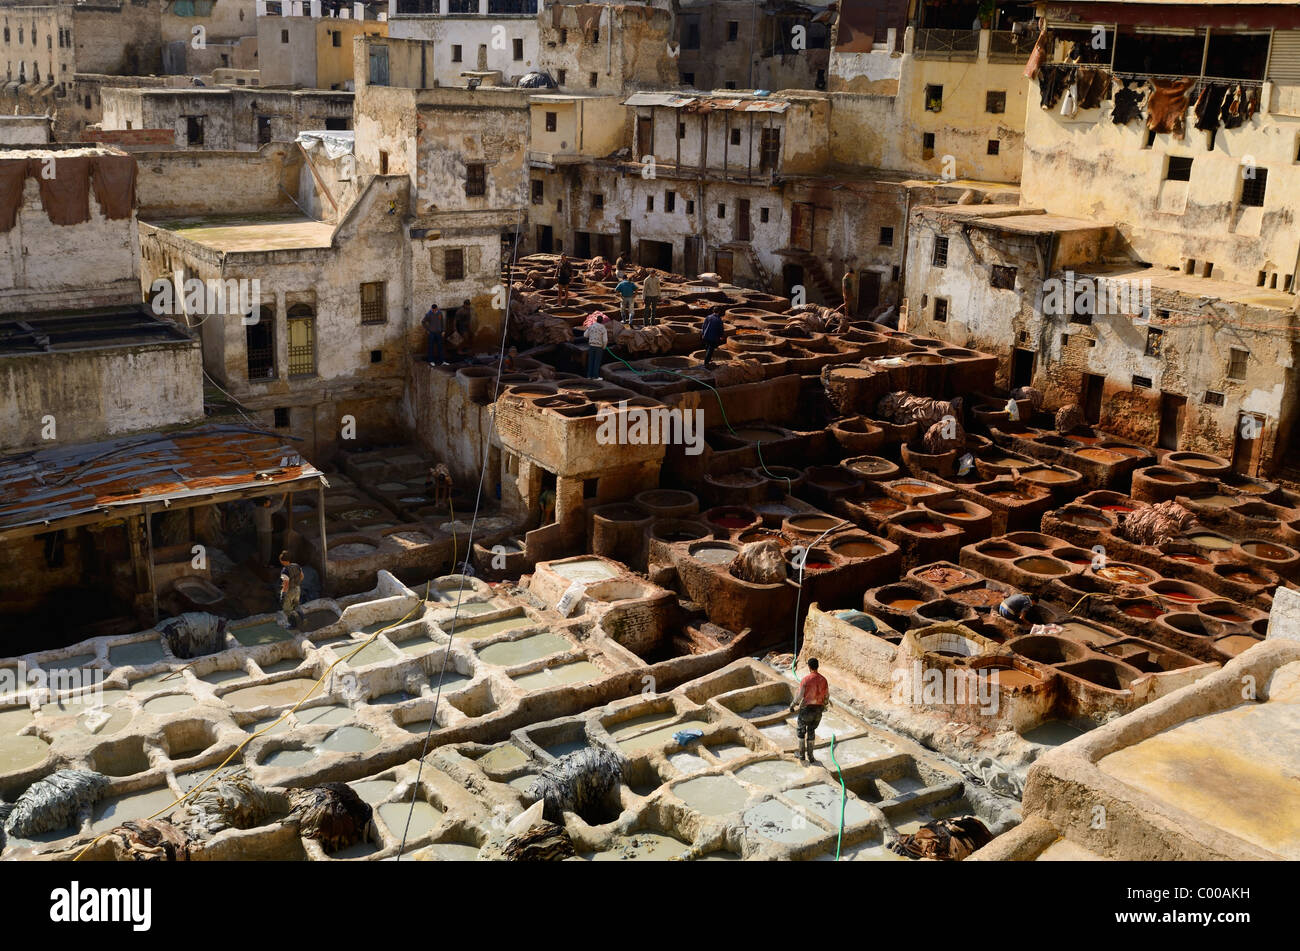 White mineral tanning vats and brown vegetable soaking pits in the Fes tannery Chouara Quarter Fez Morocco North Africa Stock Photo